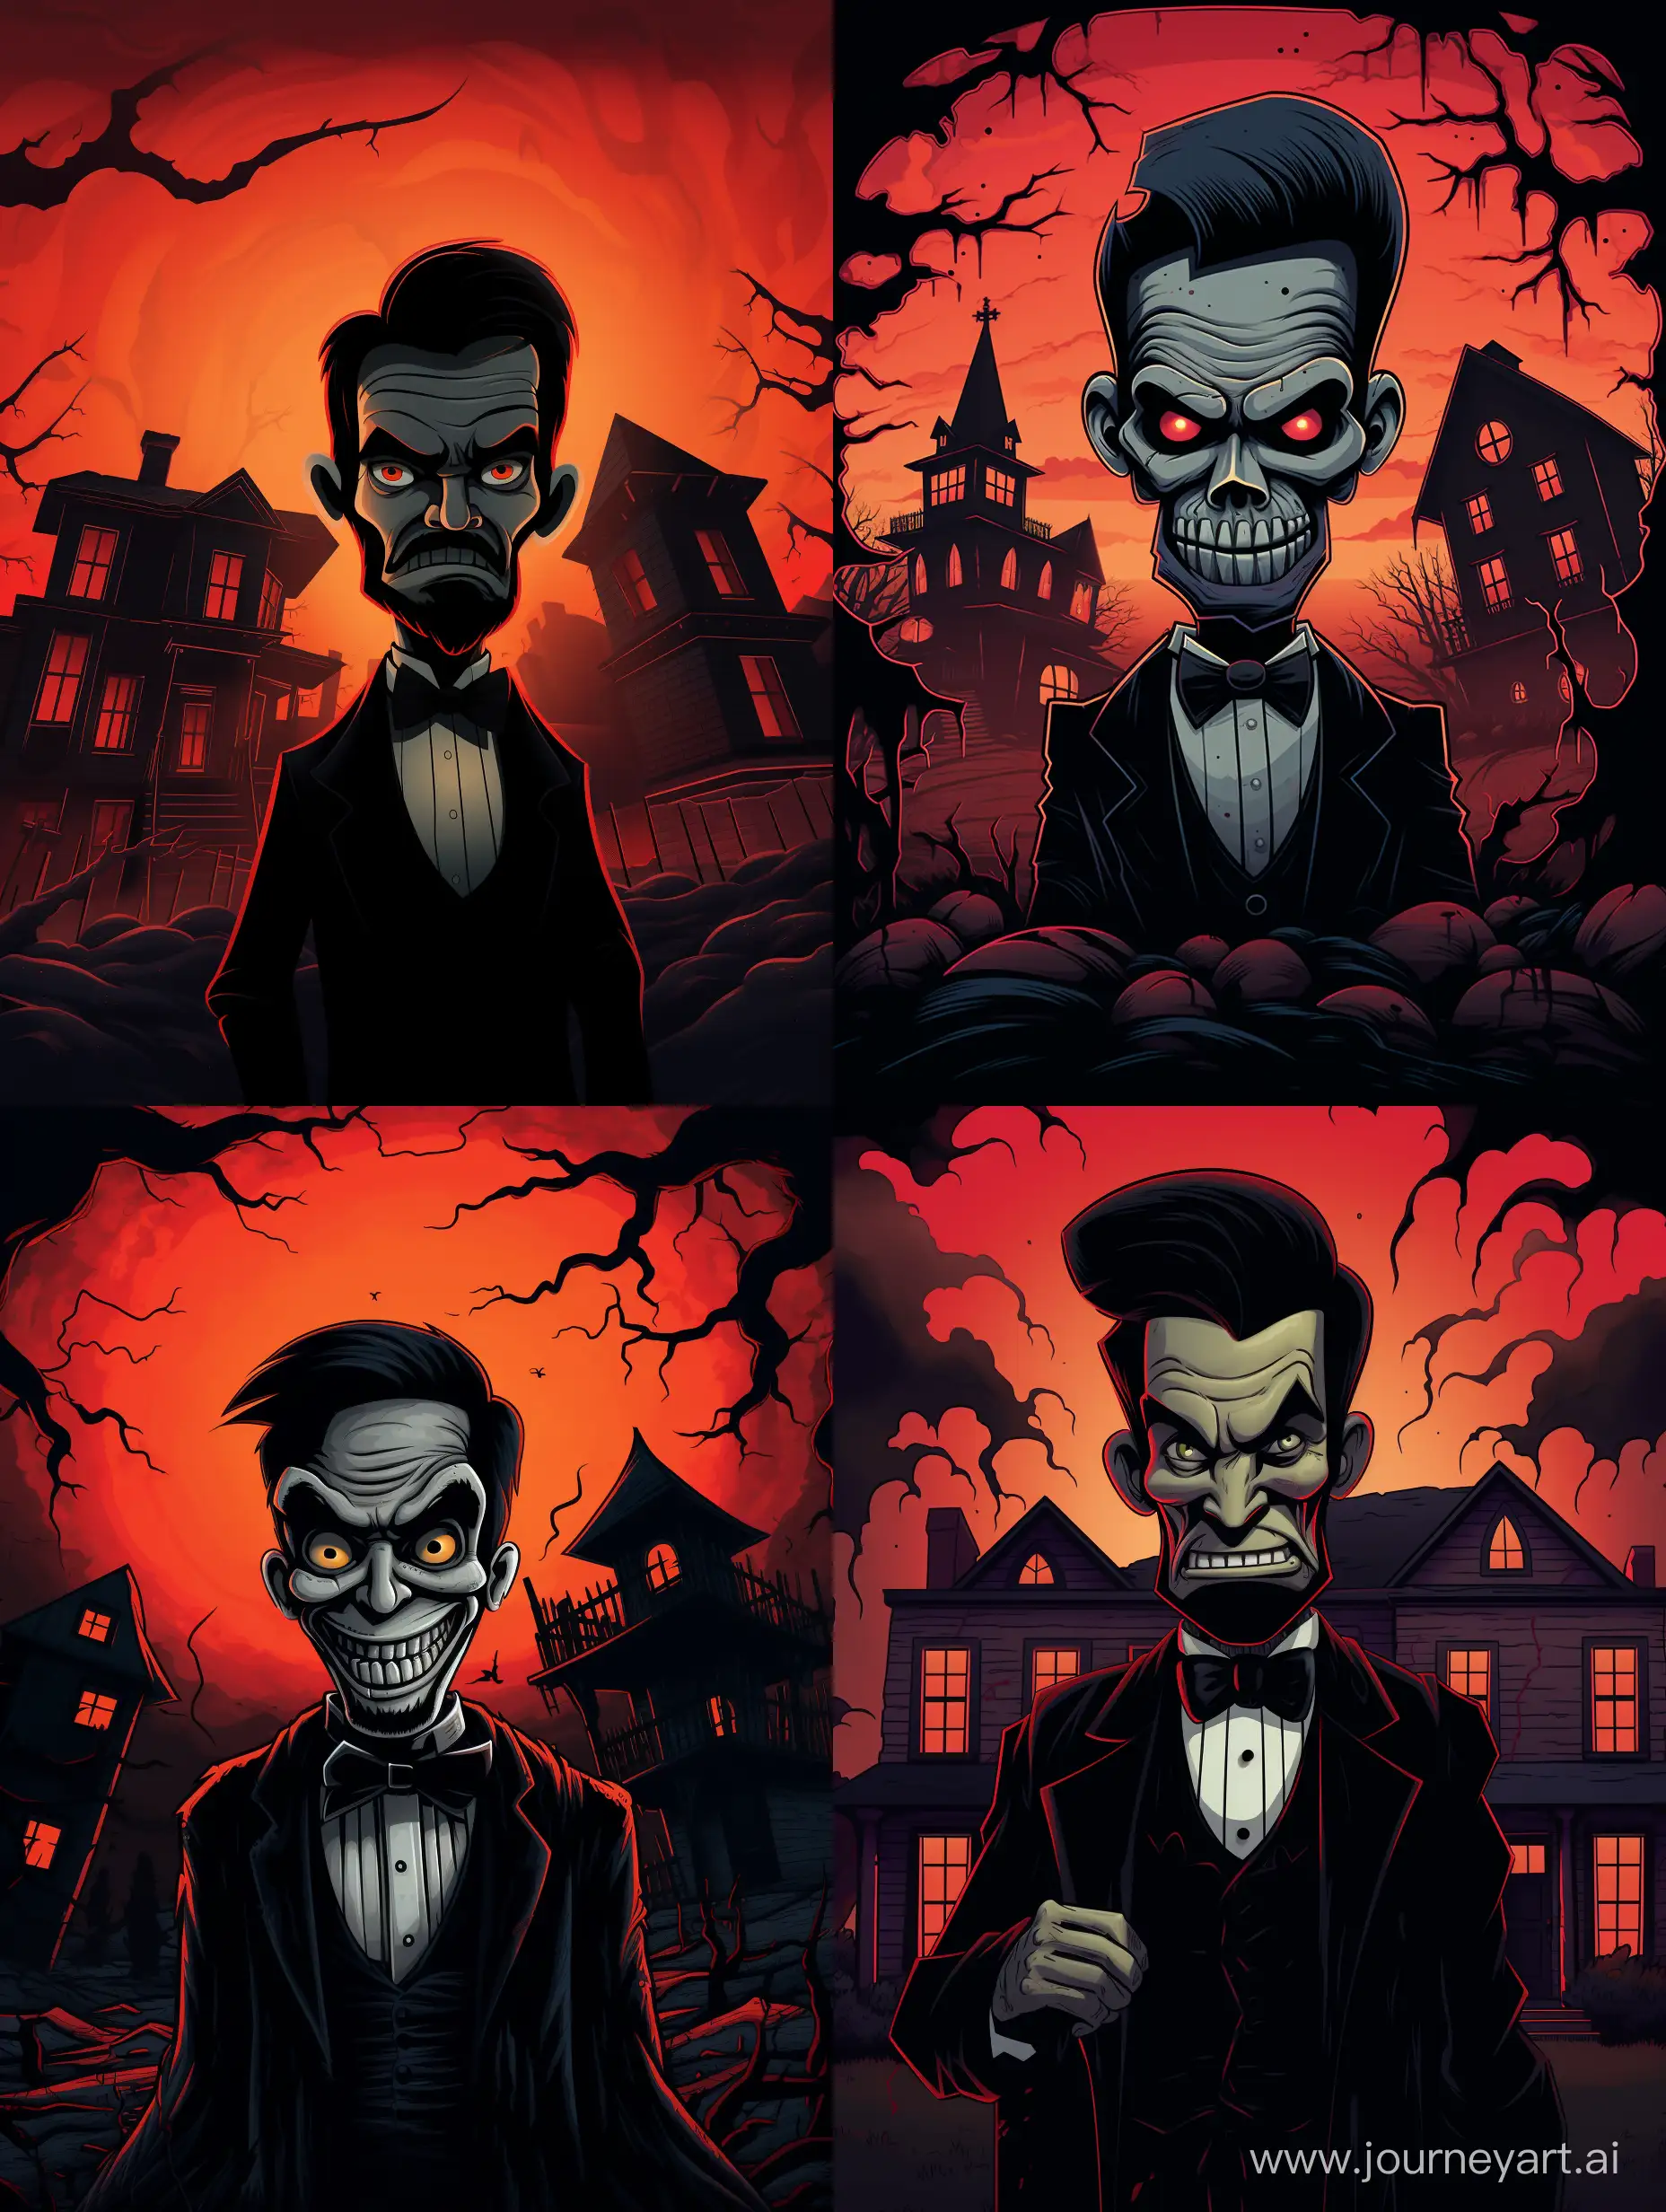 Lincoln-Loud-Confronts-a-Menacing-Haunted-Mansion-in-Ominous-Black-and-Red-Tones